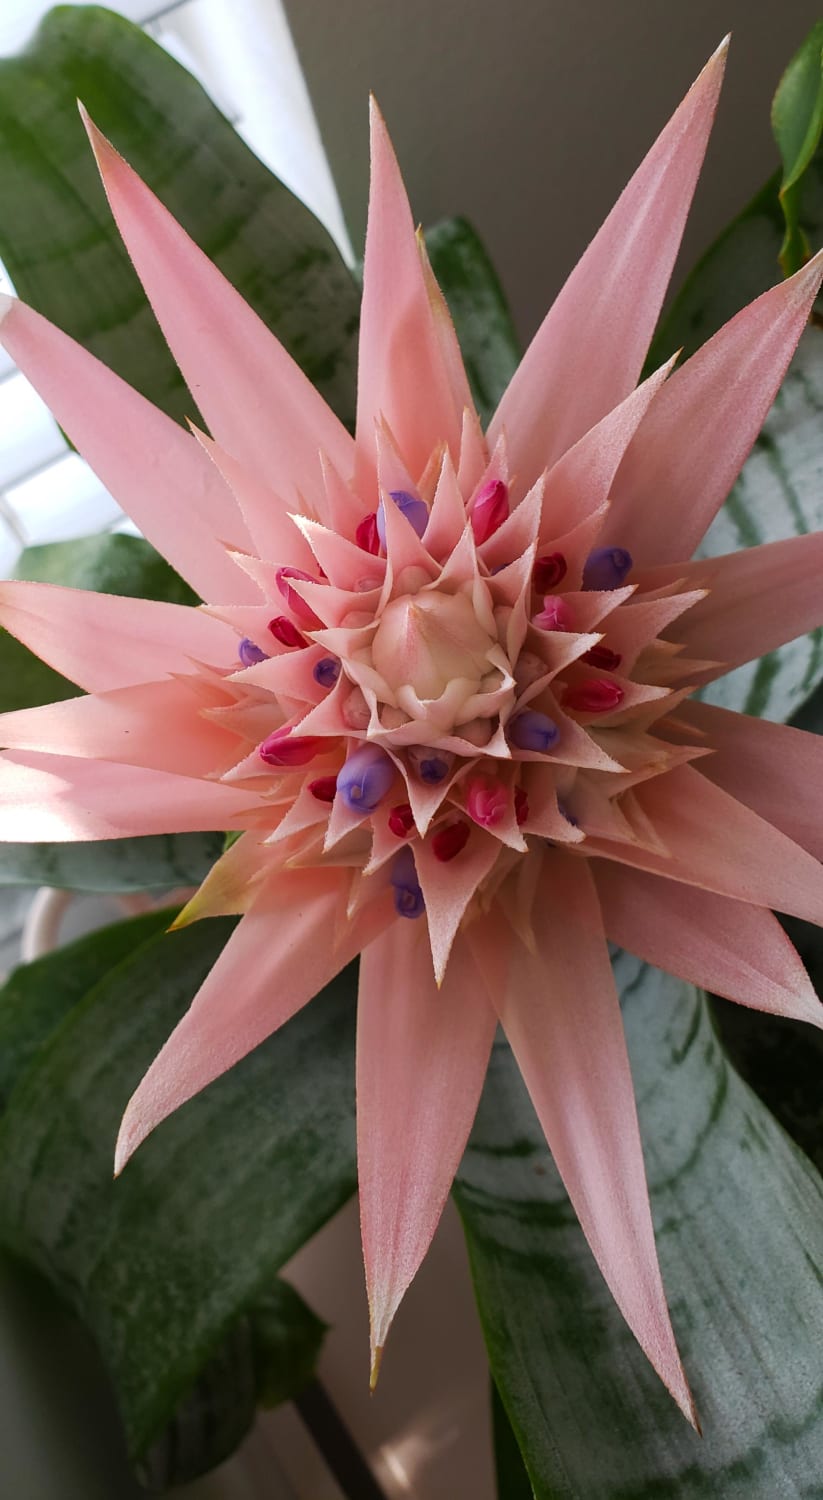 Servers are down at work so check out my Aechmea!